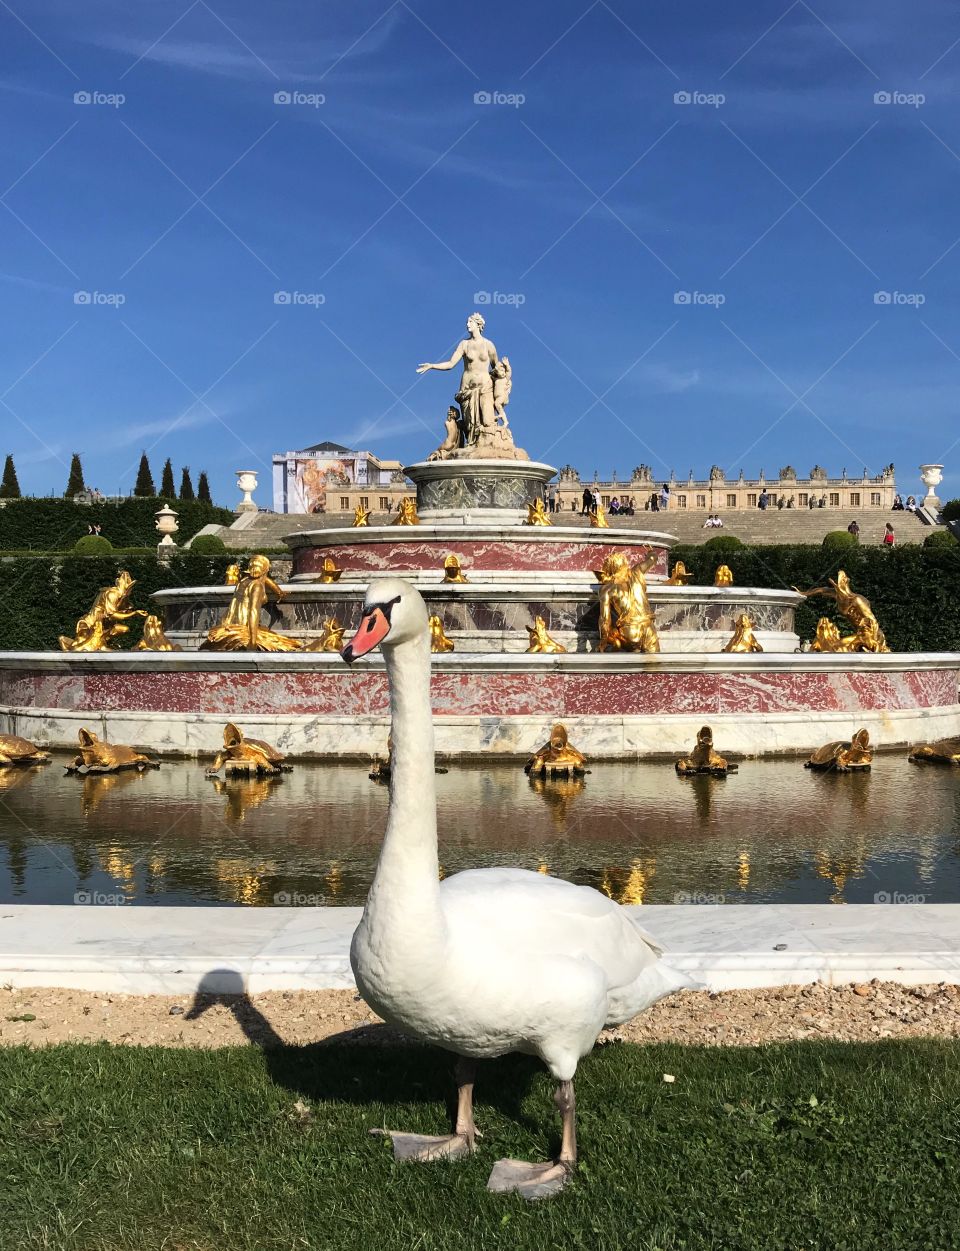 A swan stands by one of the gold fountains of Versailles, Marie Antoinette’s infamous estate located just outside Paris